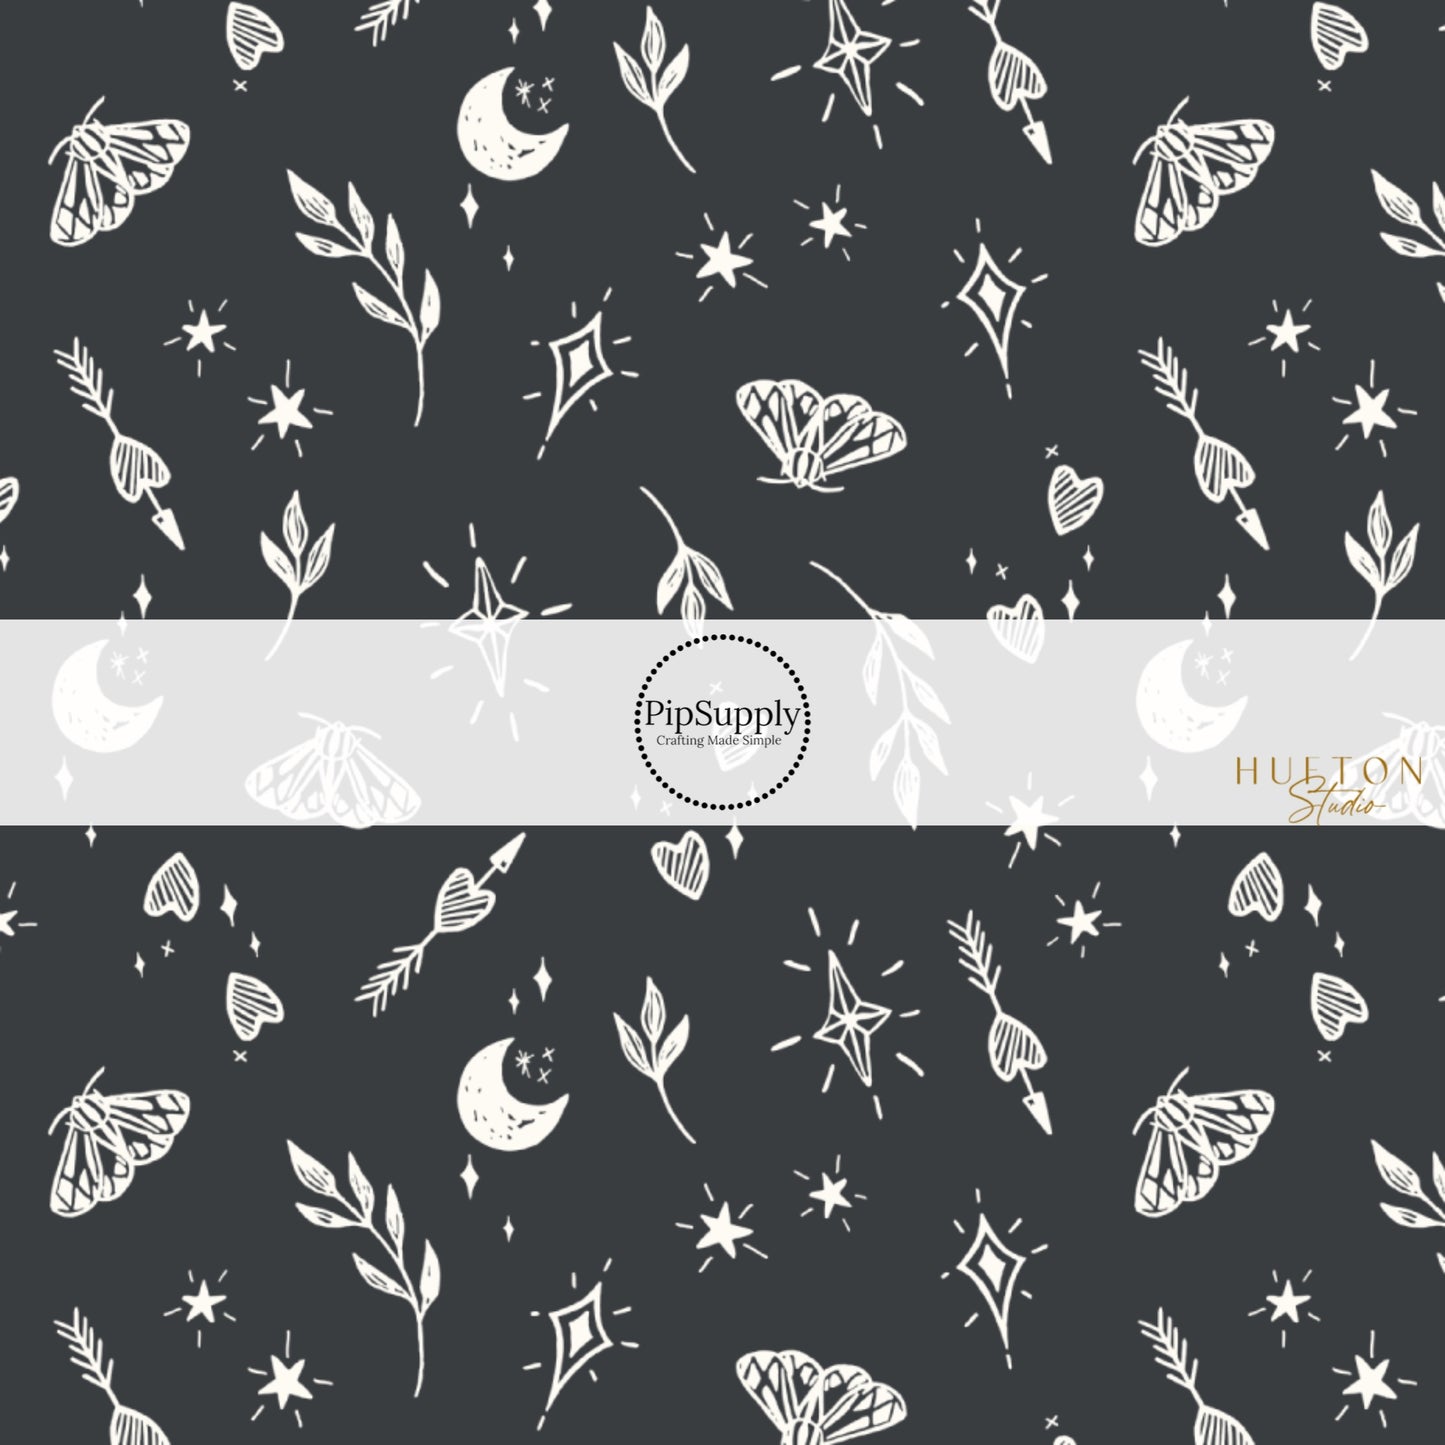 These Halloween themed black fabric by the yard features cream leaves, moths, hearts, moons, and stars on black. This fun themed fabric can be used for all your sewing and crafting needs! 